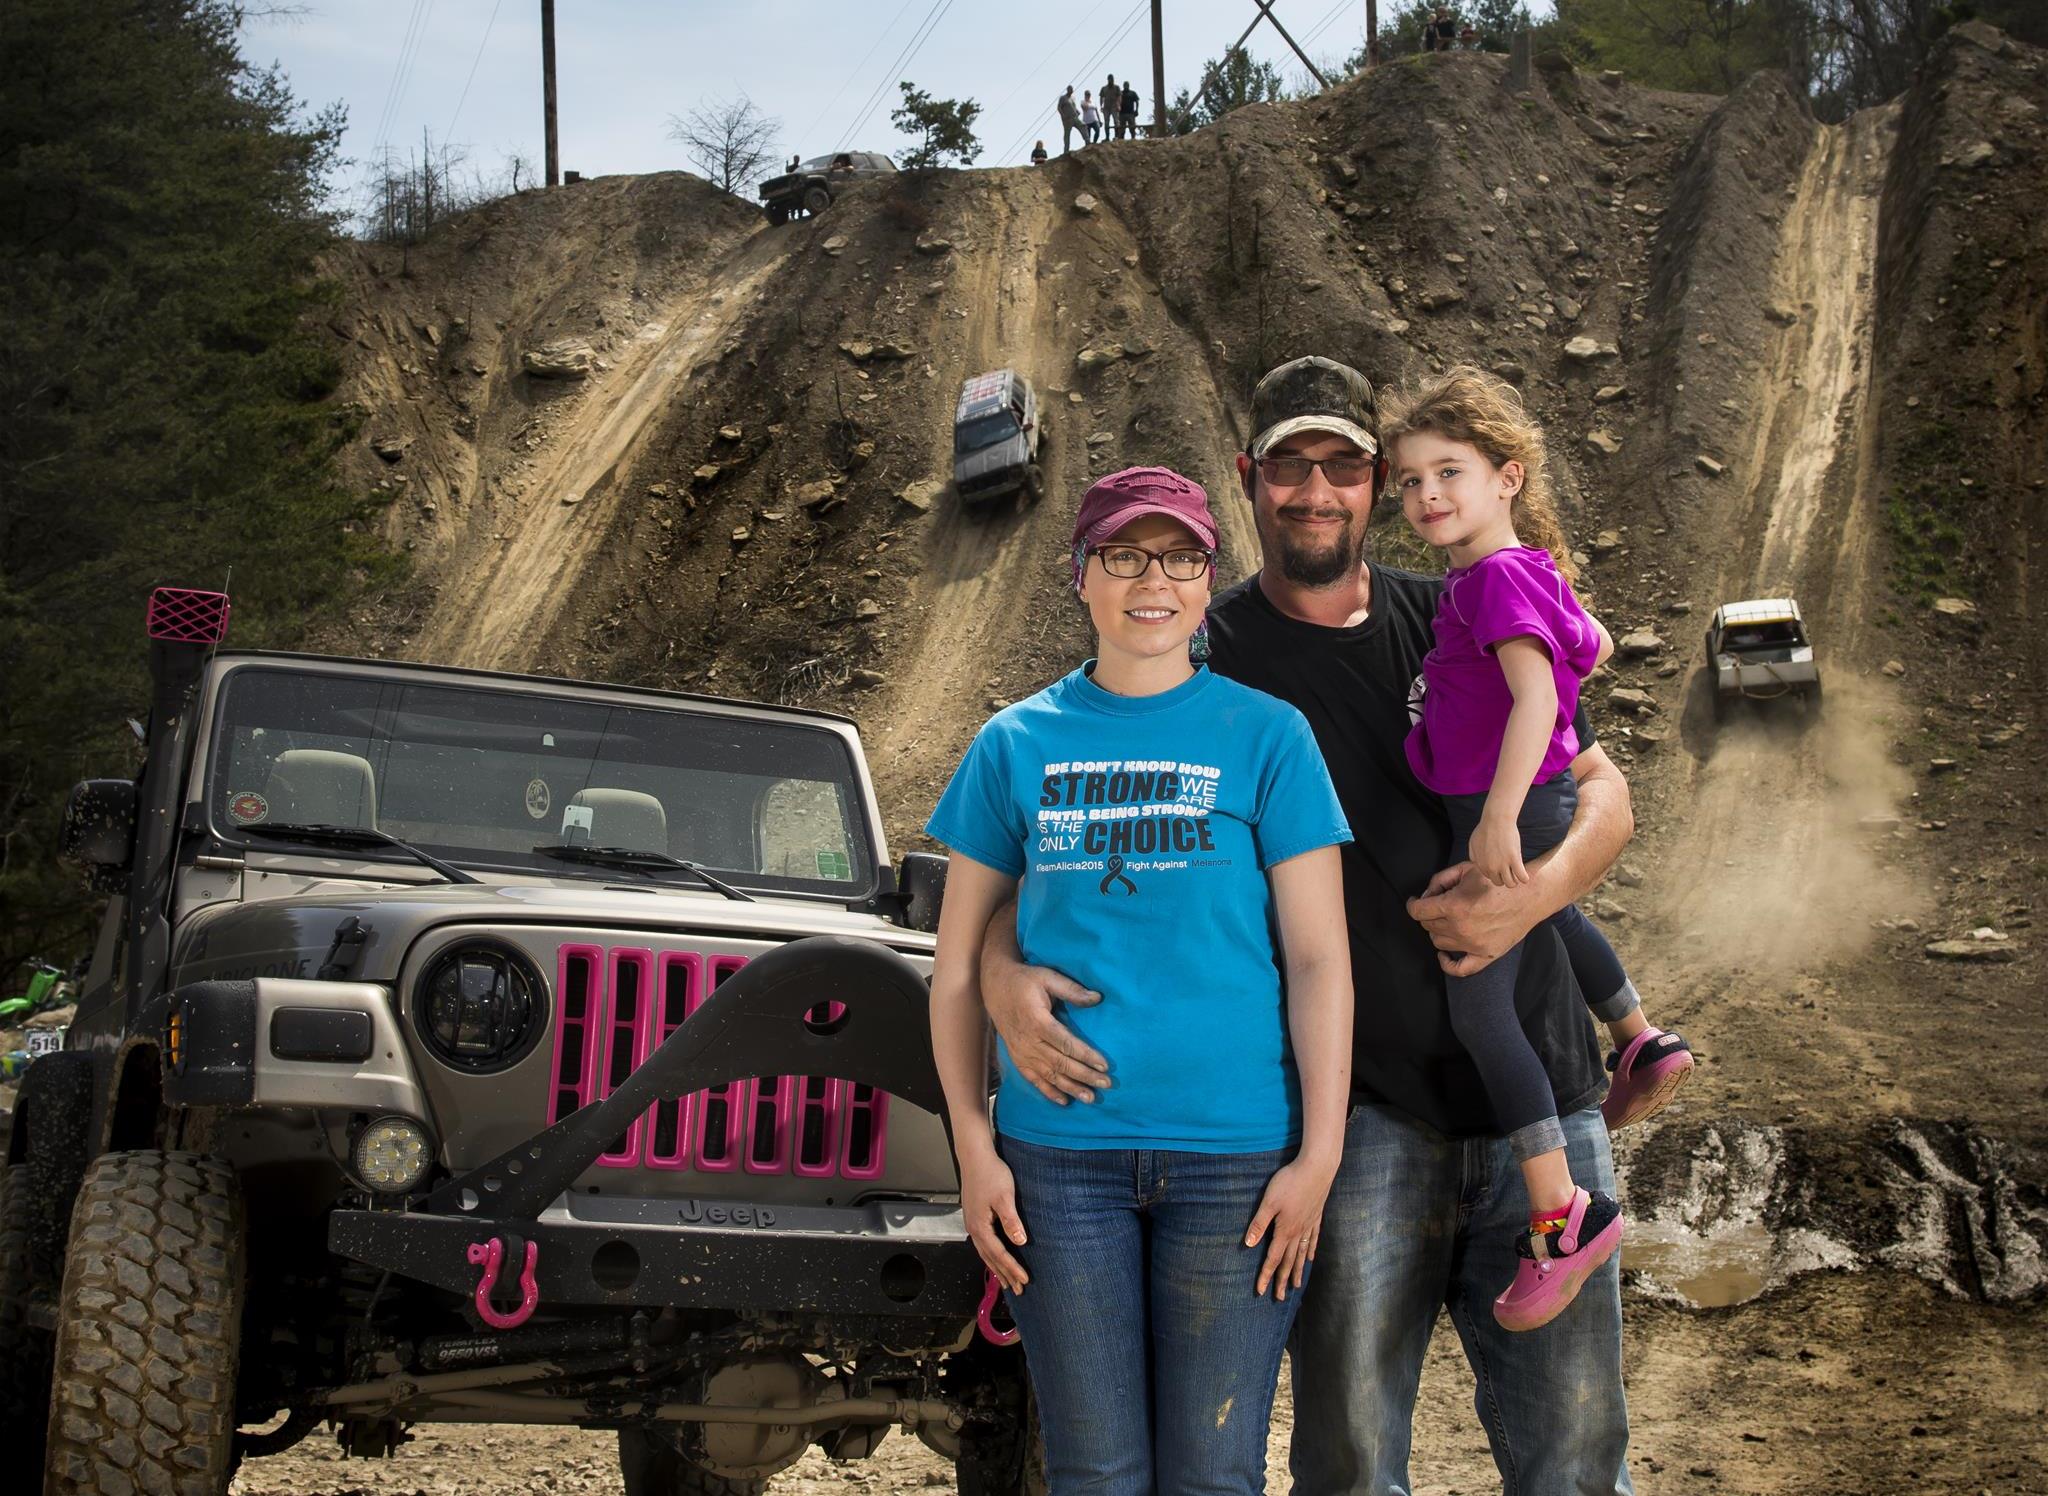 Alicia Mitchell and her family during a recent off-road adventure at Redbird State Recreation Area in Linton, Indiana.